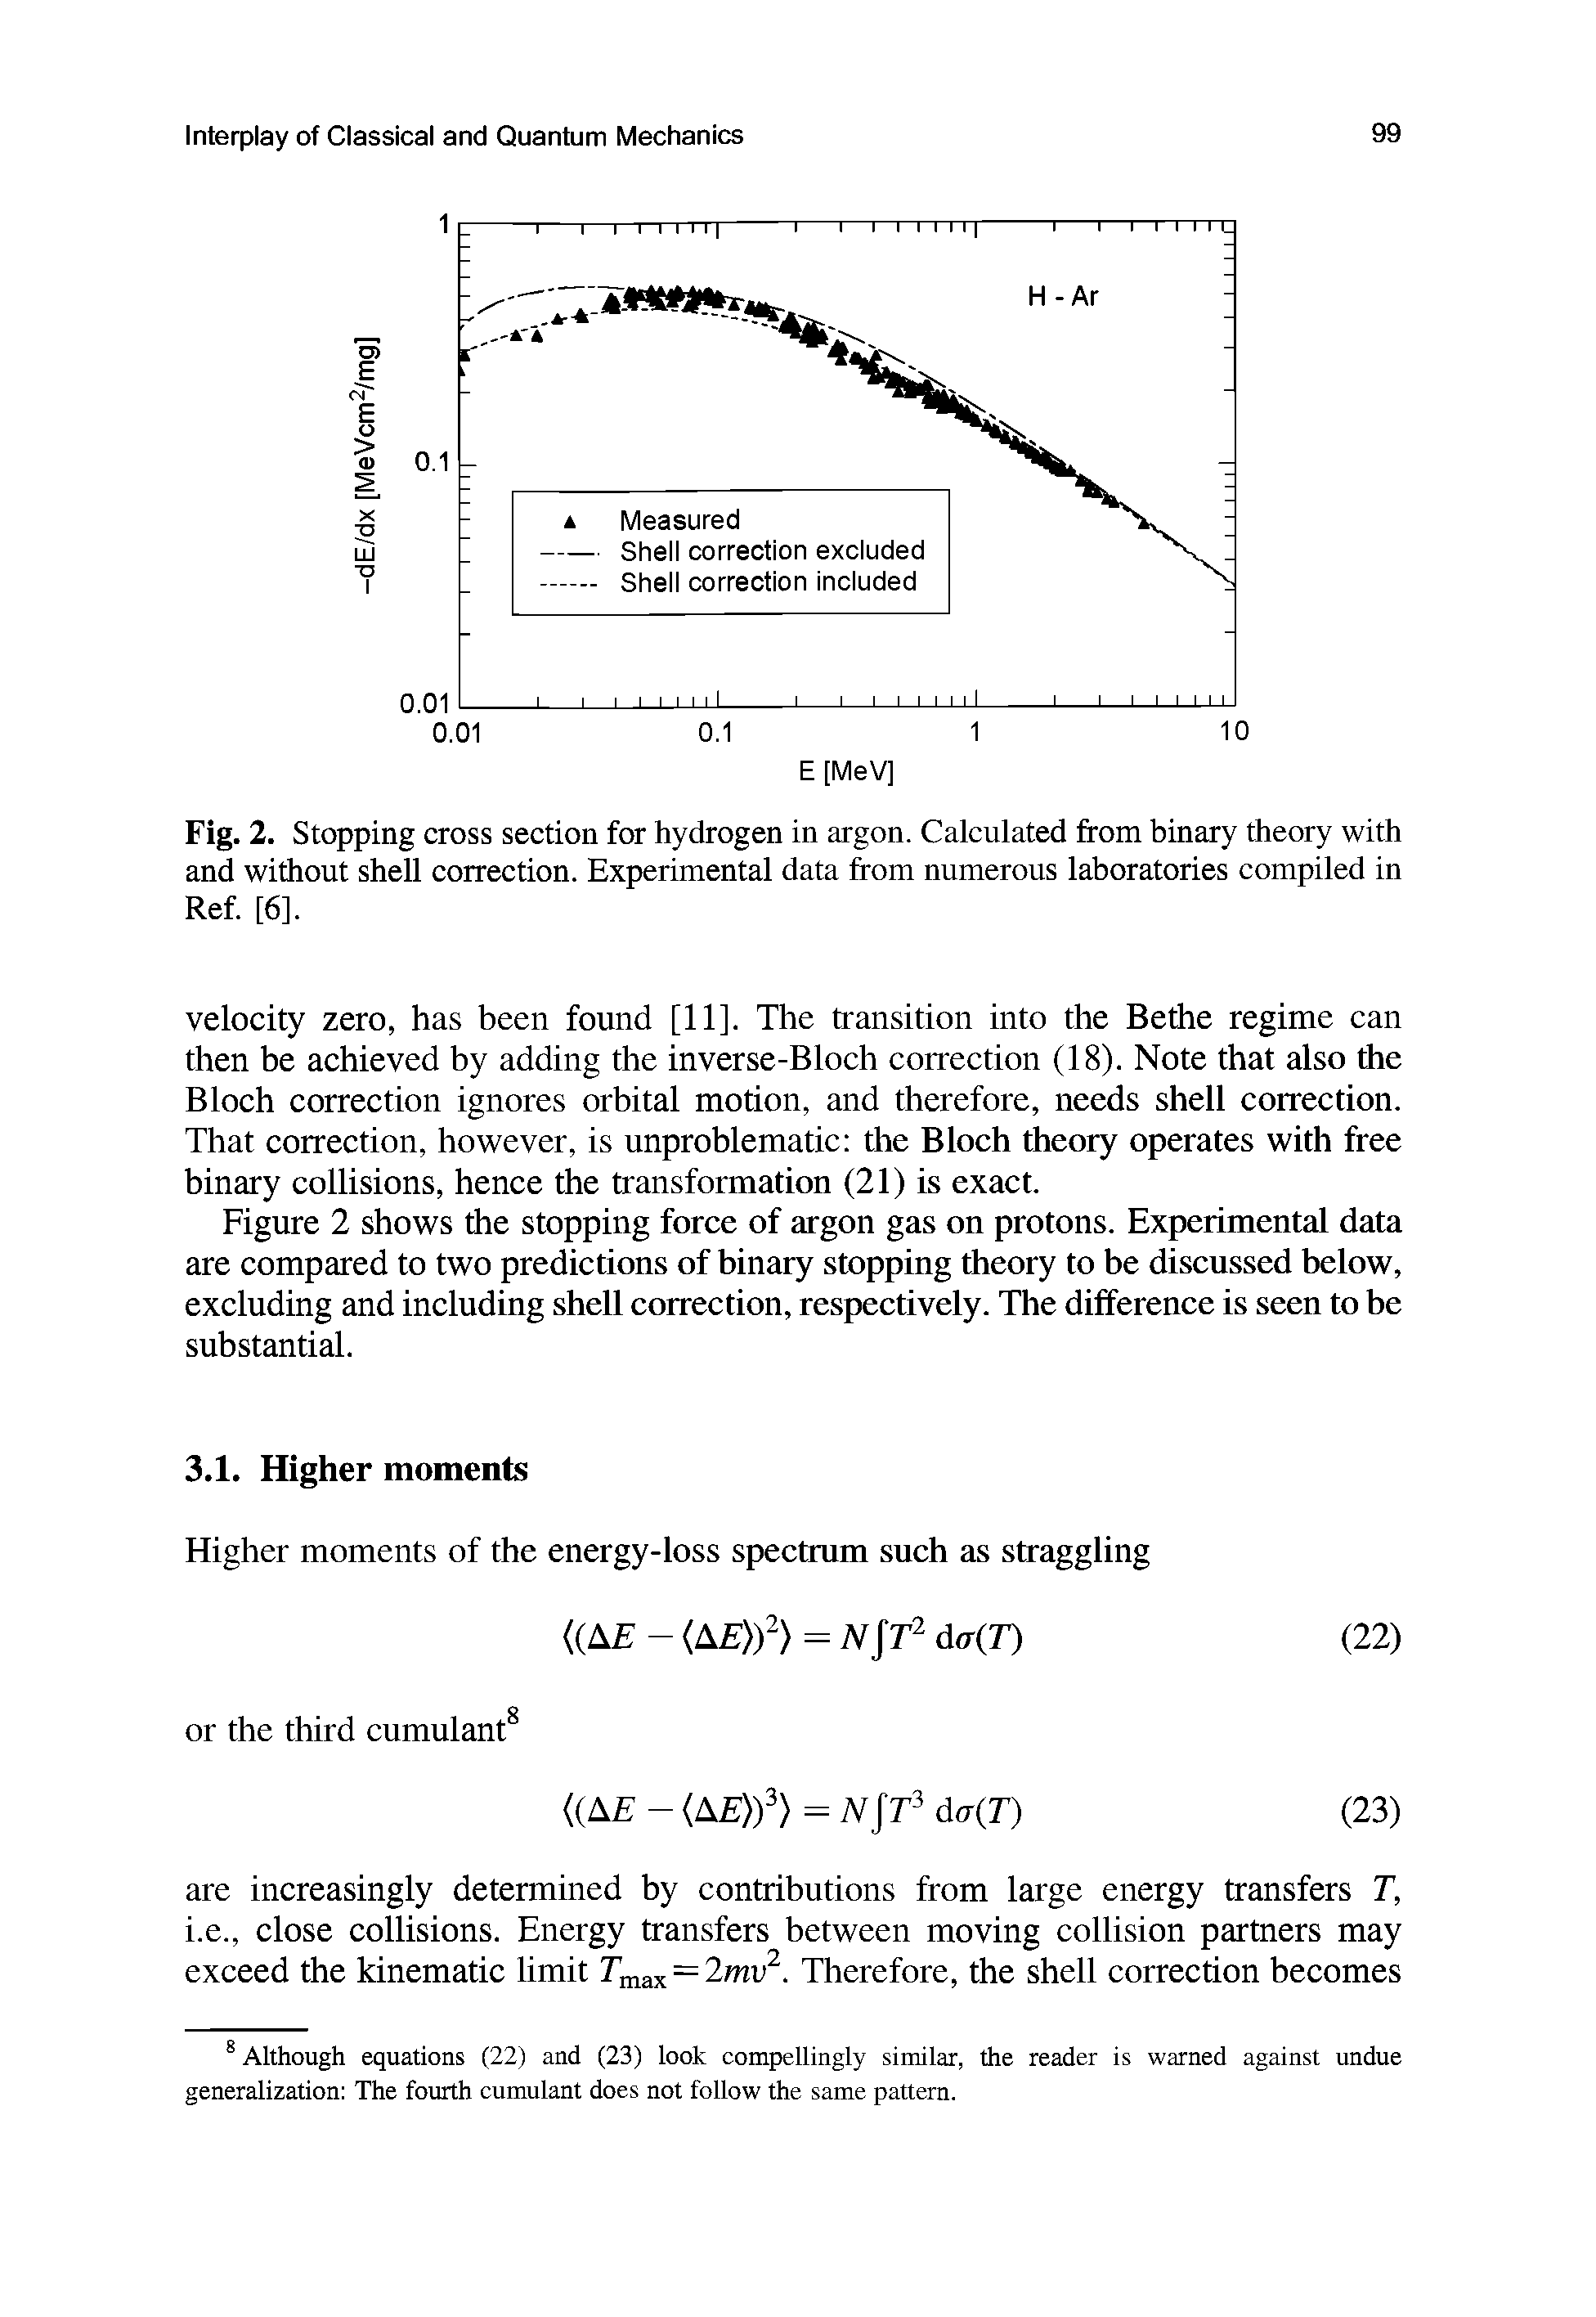 Fig. 2. Stopping cross section for hydrogen in argon. Calculated from binary theory with and without shell correction. Experimental data from numerous laboratories compiled in Ref. [6].